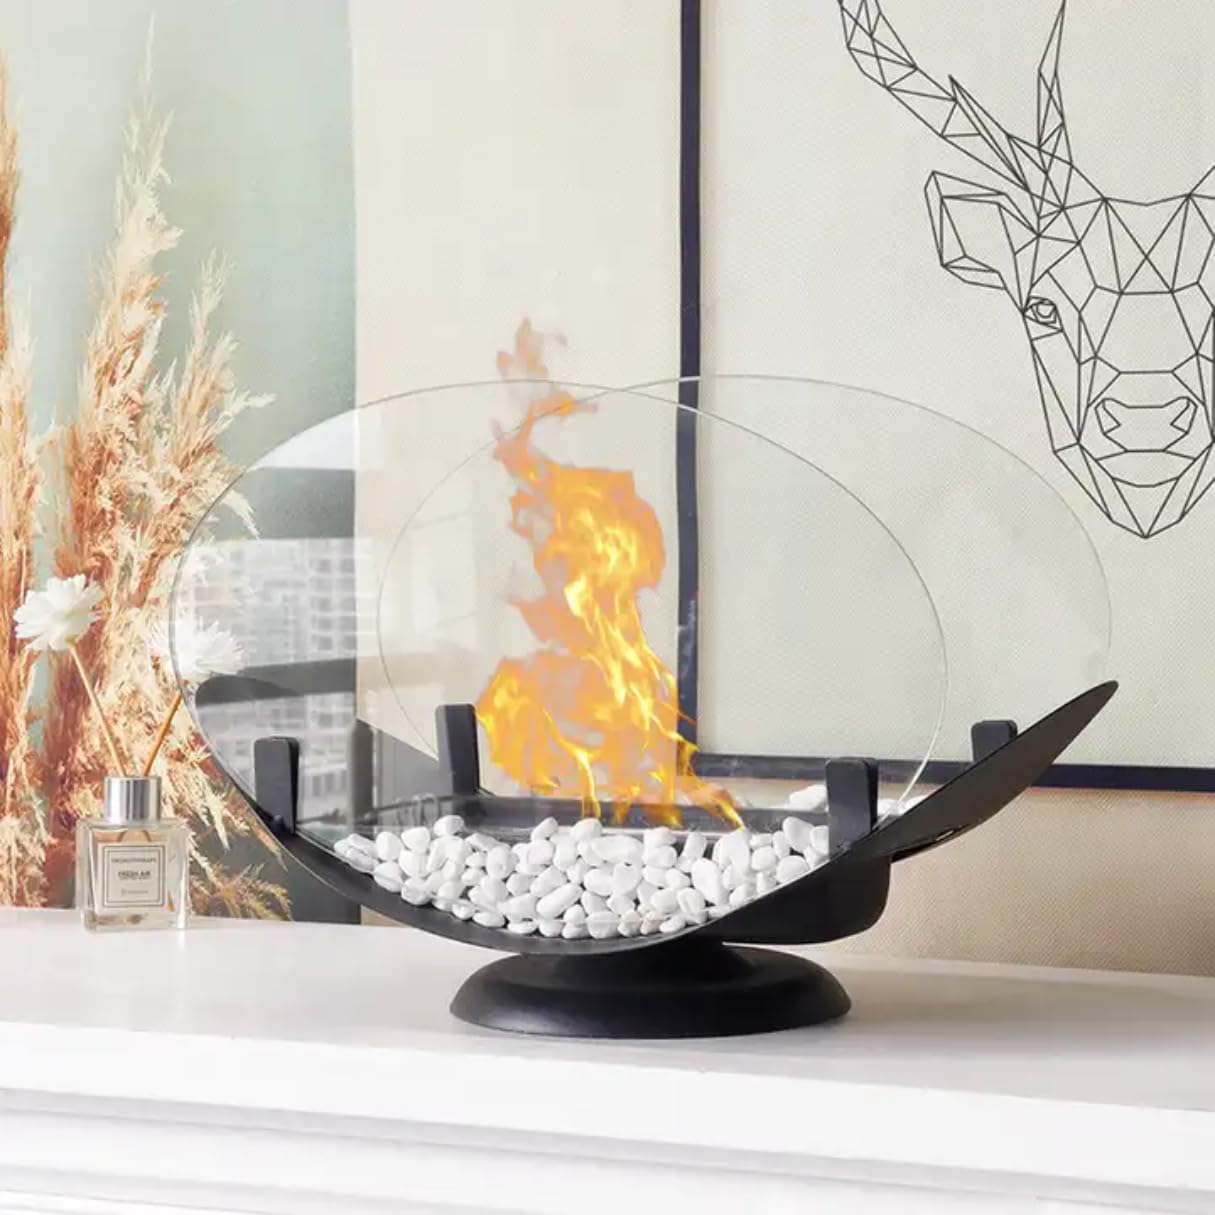 CozyApex Table Bio Ethanol Fuel Oval Fireplace - Unique Alcohol Gel Insert for Dining Table & Banquet Holiday Décor